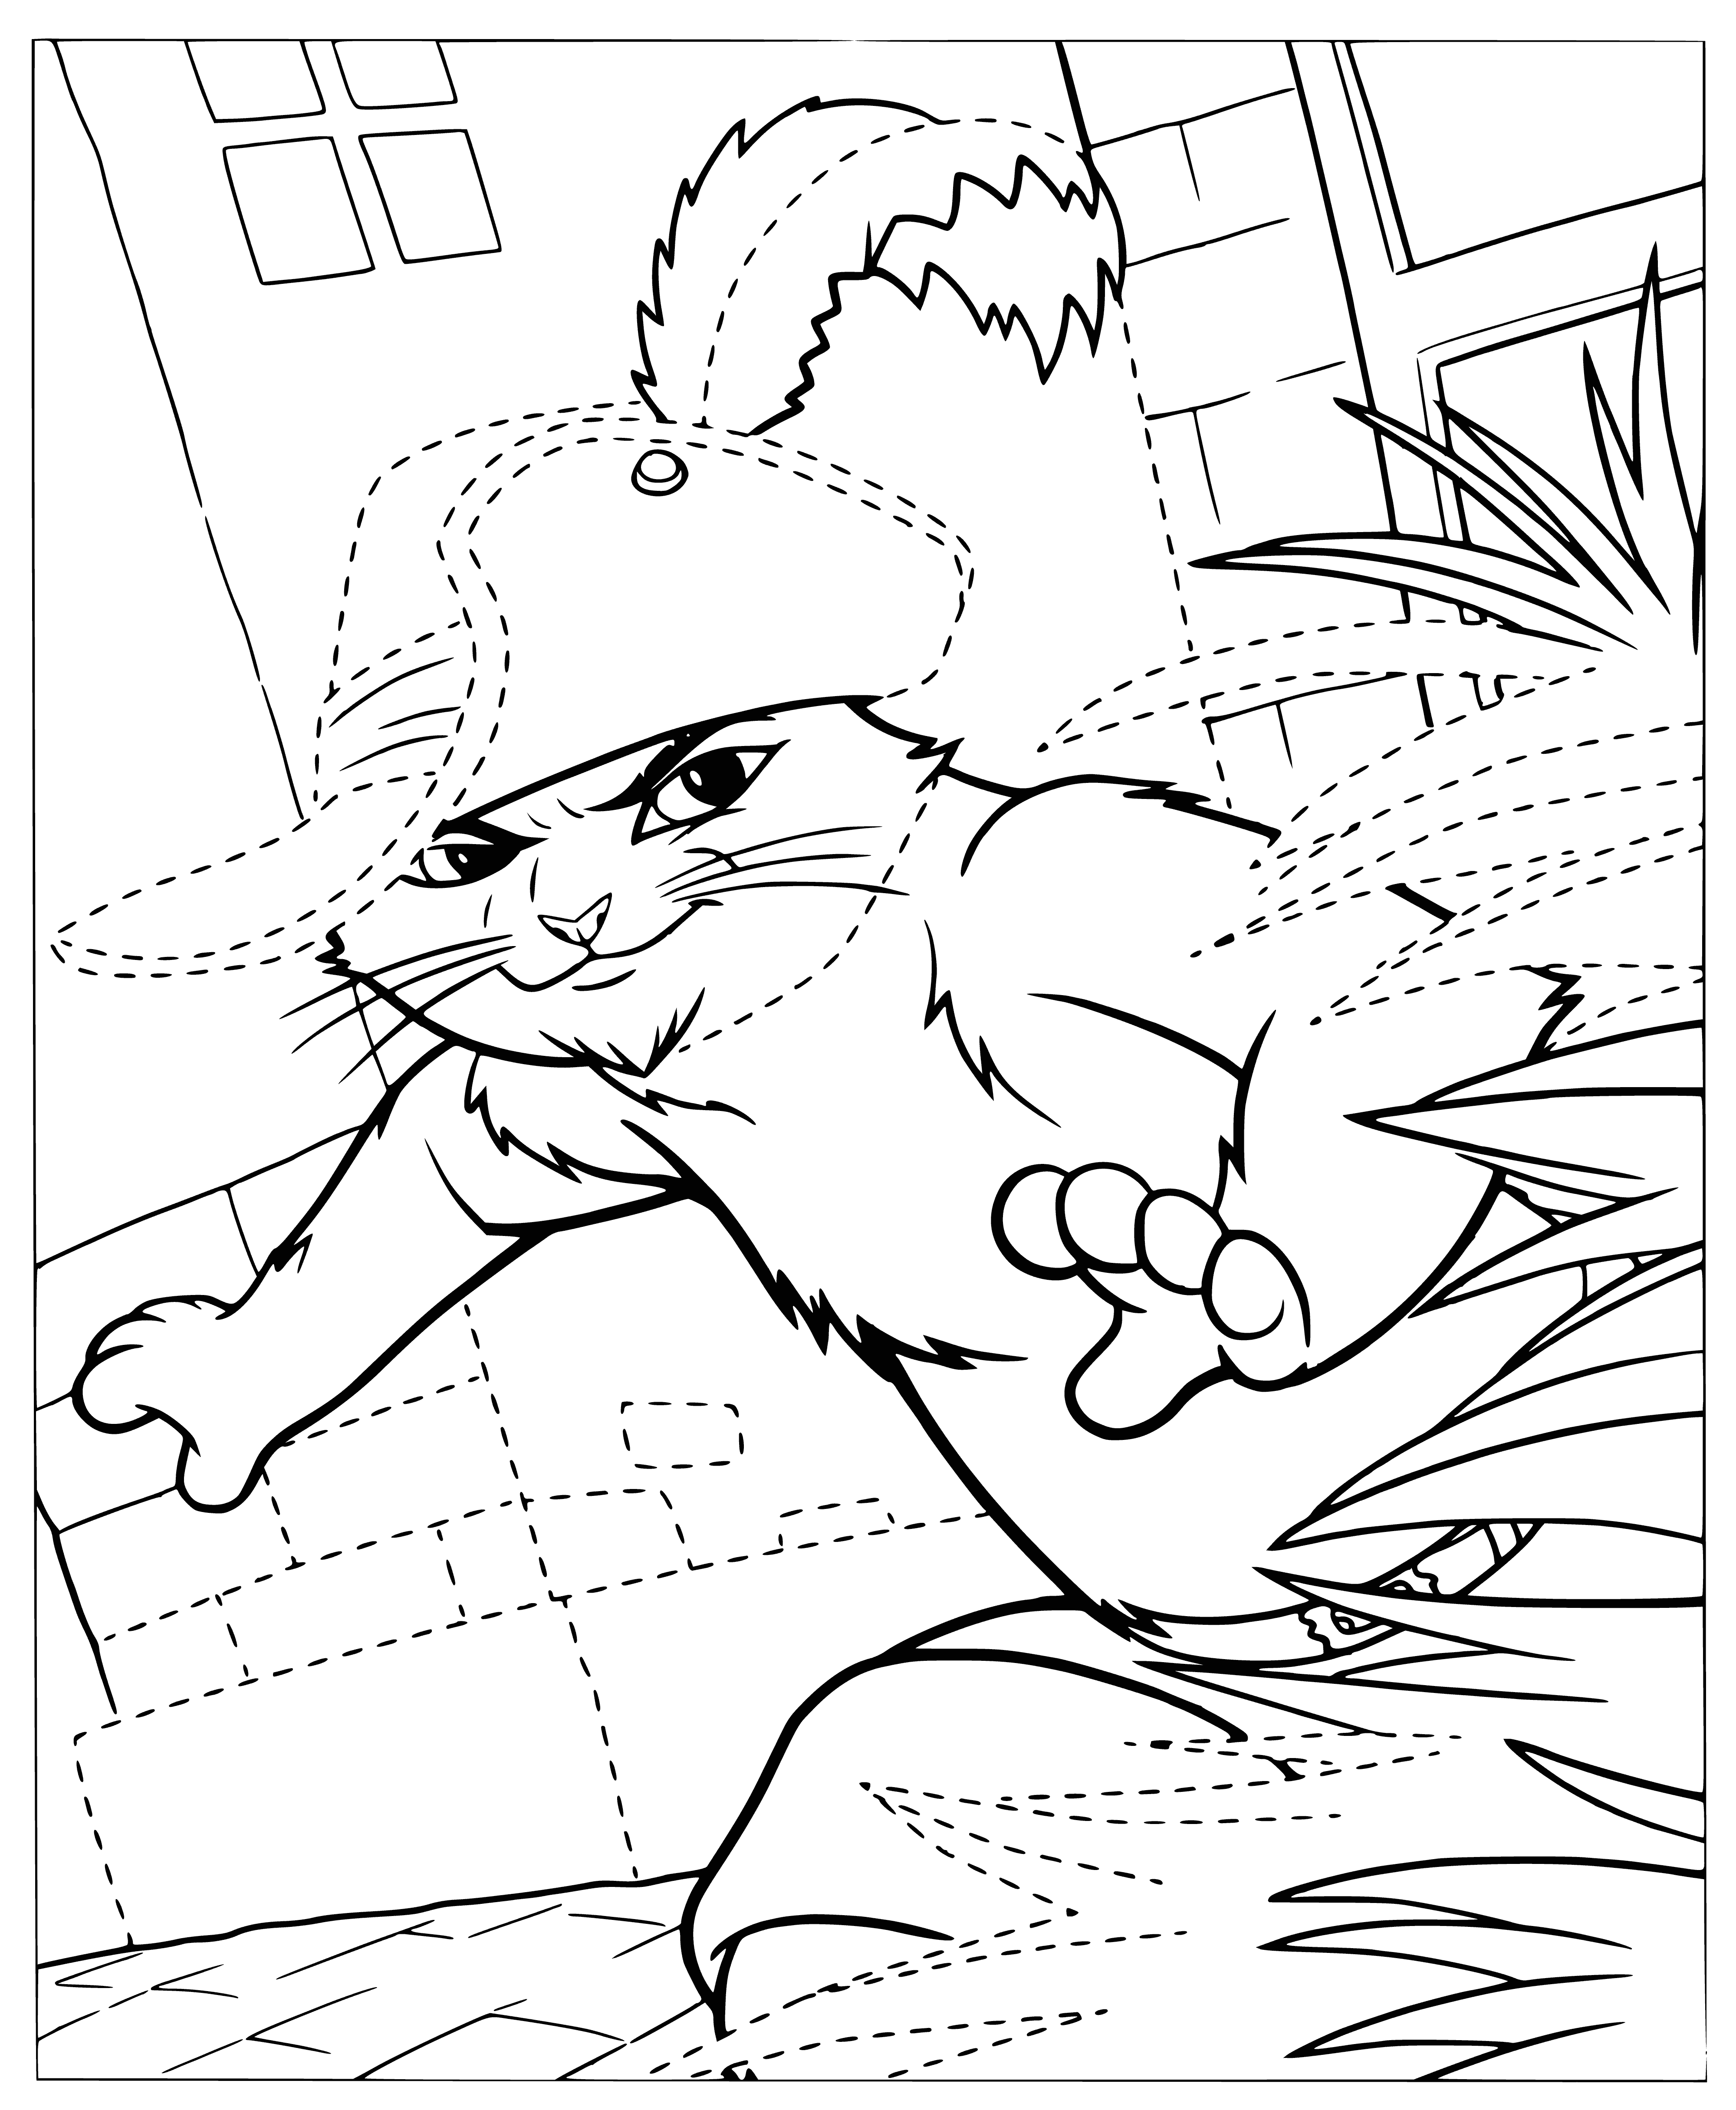 coloring page: A large, orange cat wearing brown boots and looking off to the left with a comical face! #cutecat